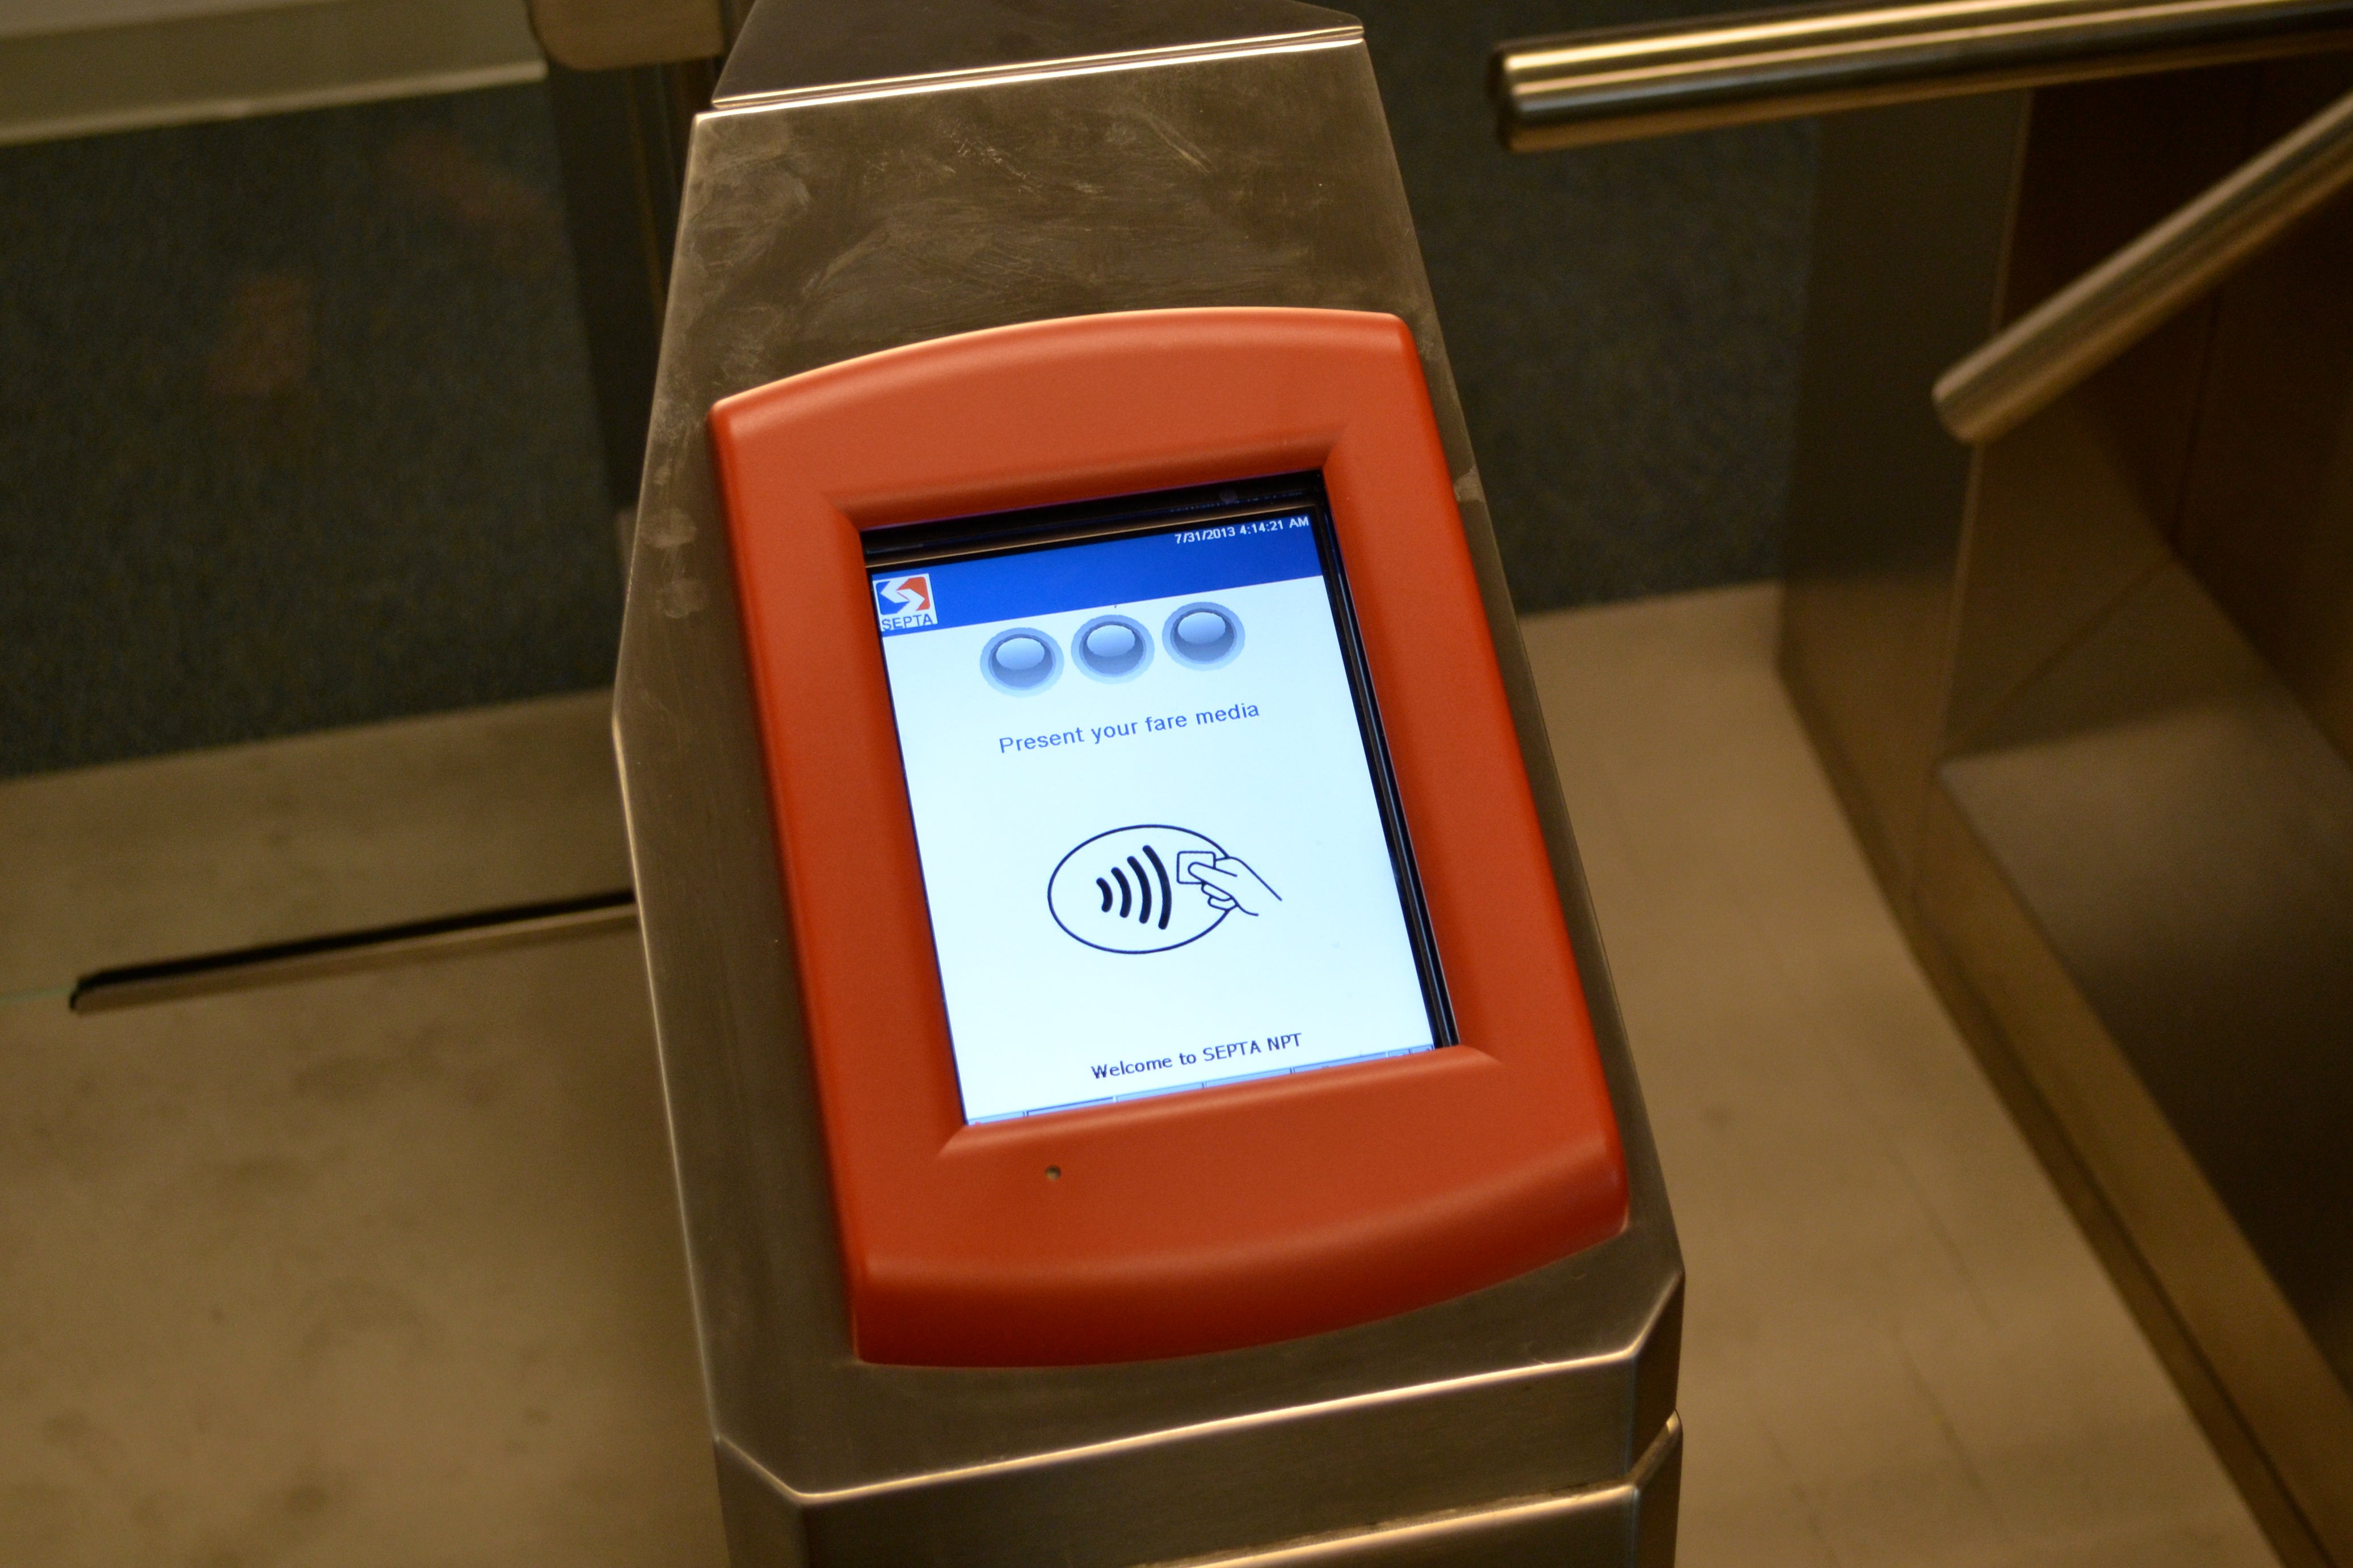 With NPT, passengers will tap a smartcard or NFC chip equipped device on an electronic reader